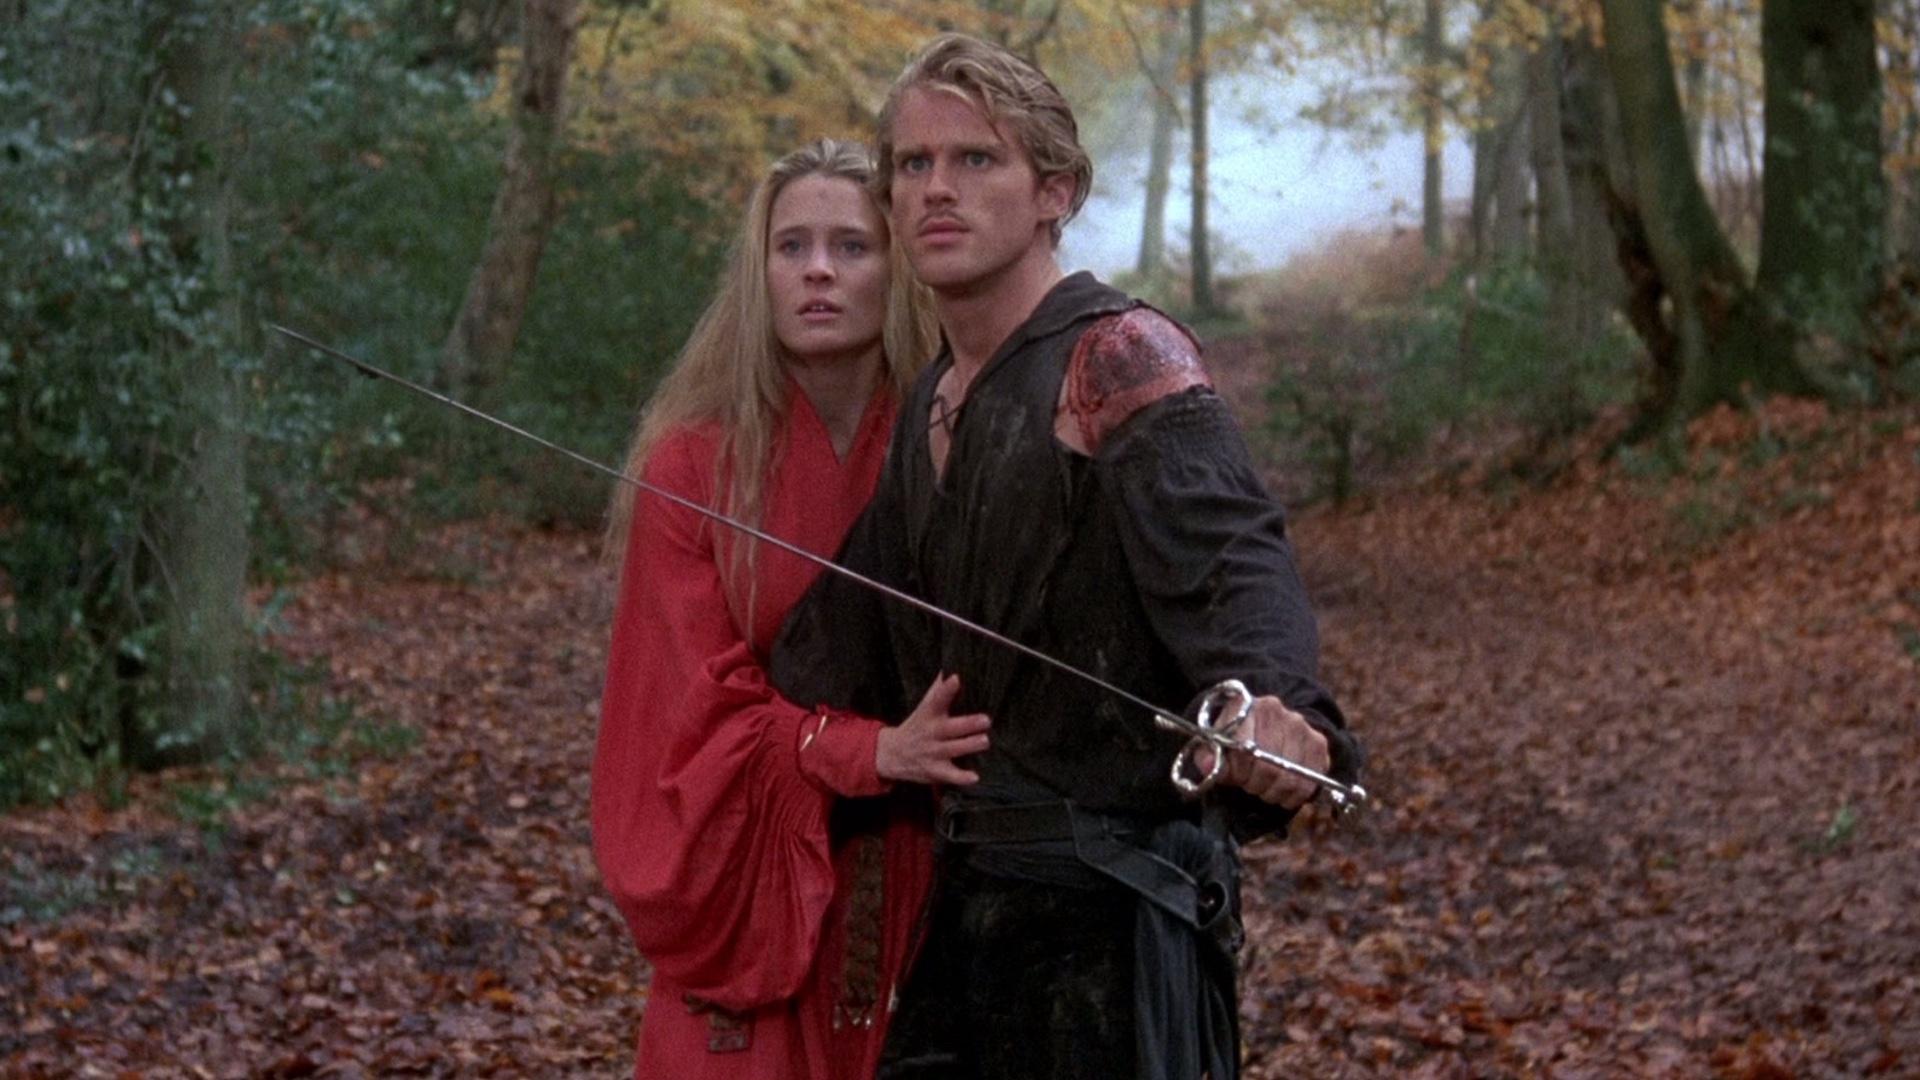 THE PRINCESS BRIDE of Difference Between The Book